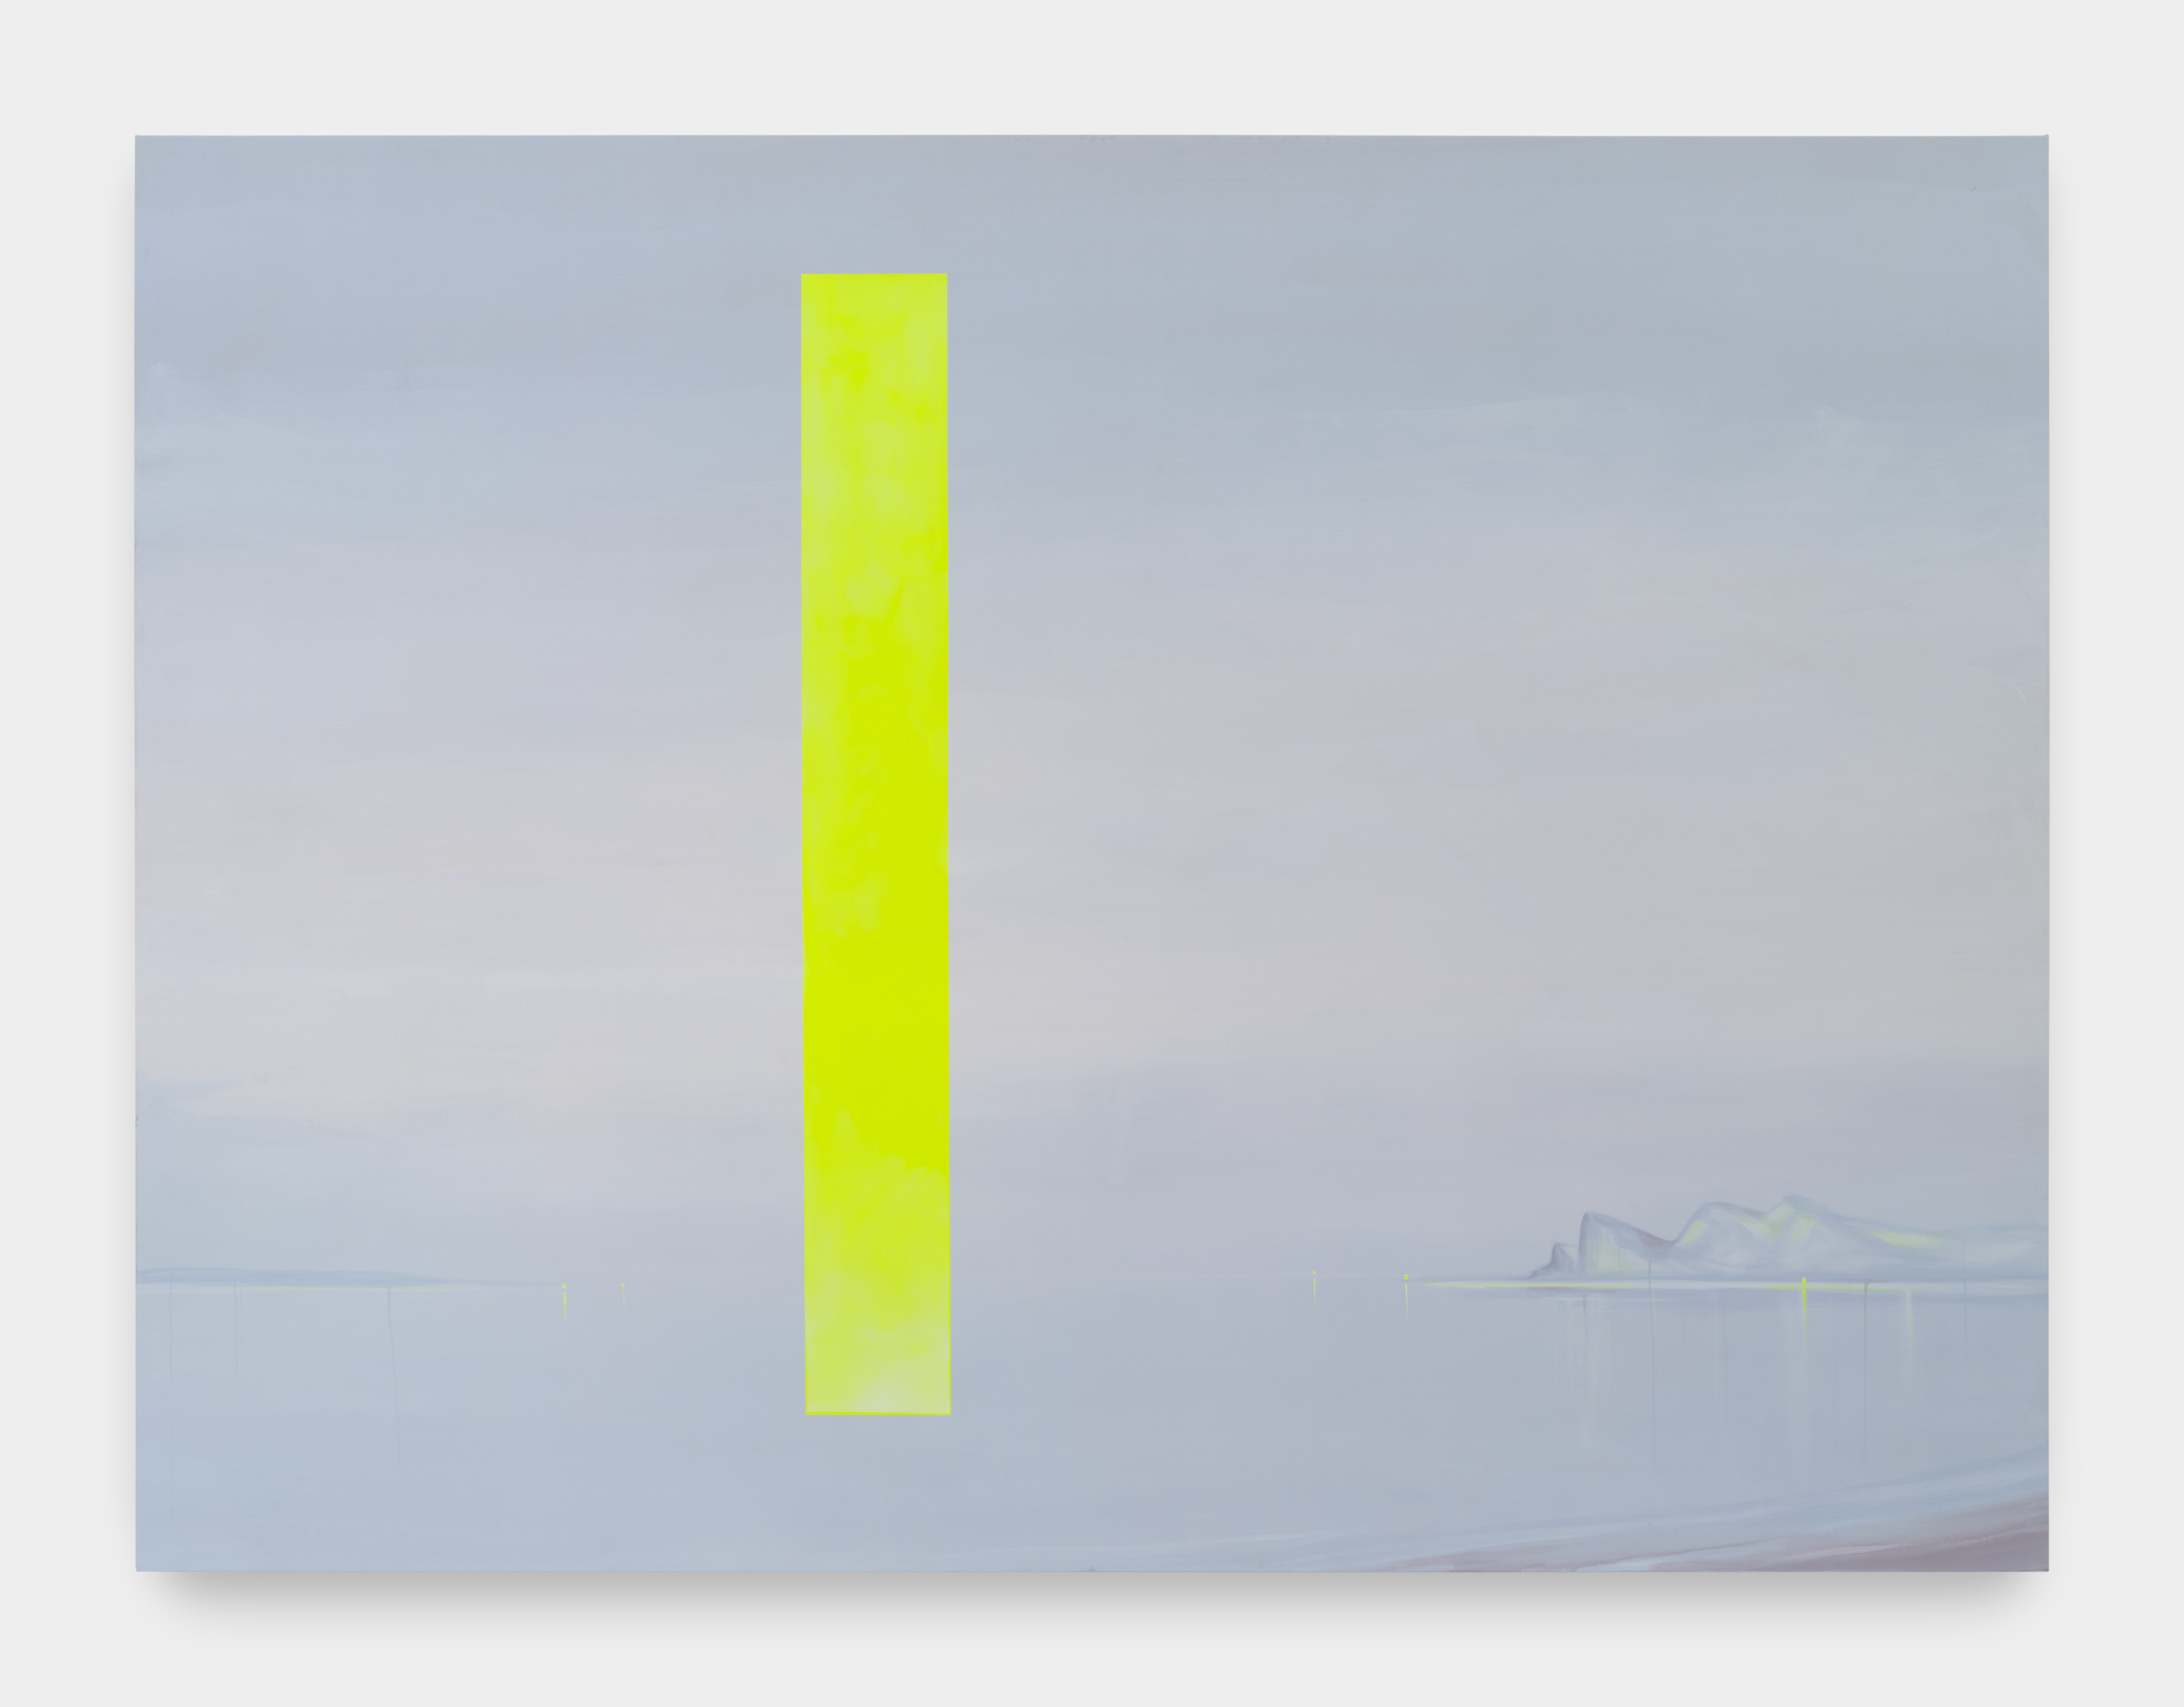 An ice blue/ grey painting with a mountain range in the distance, and a vertical neon yellow portal near the center of the work 